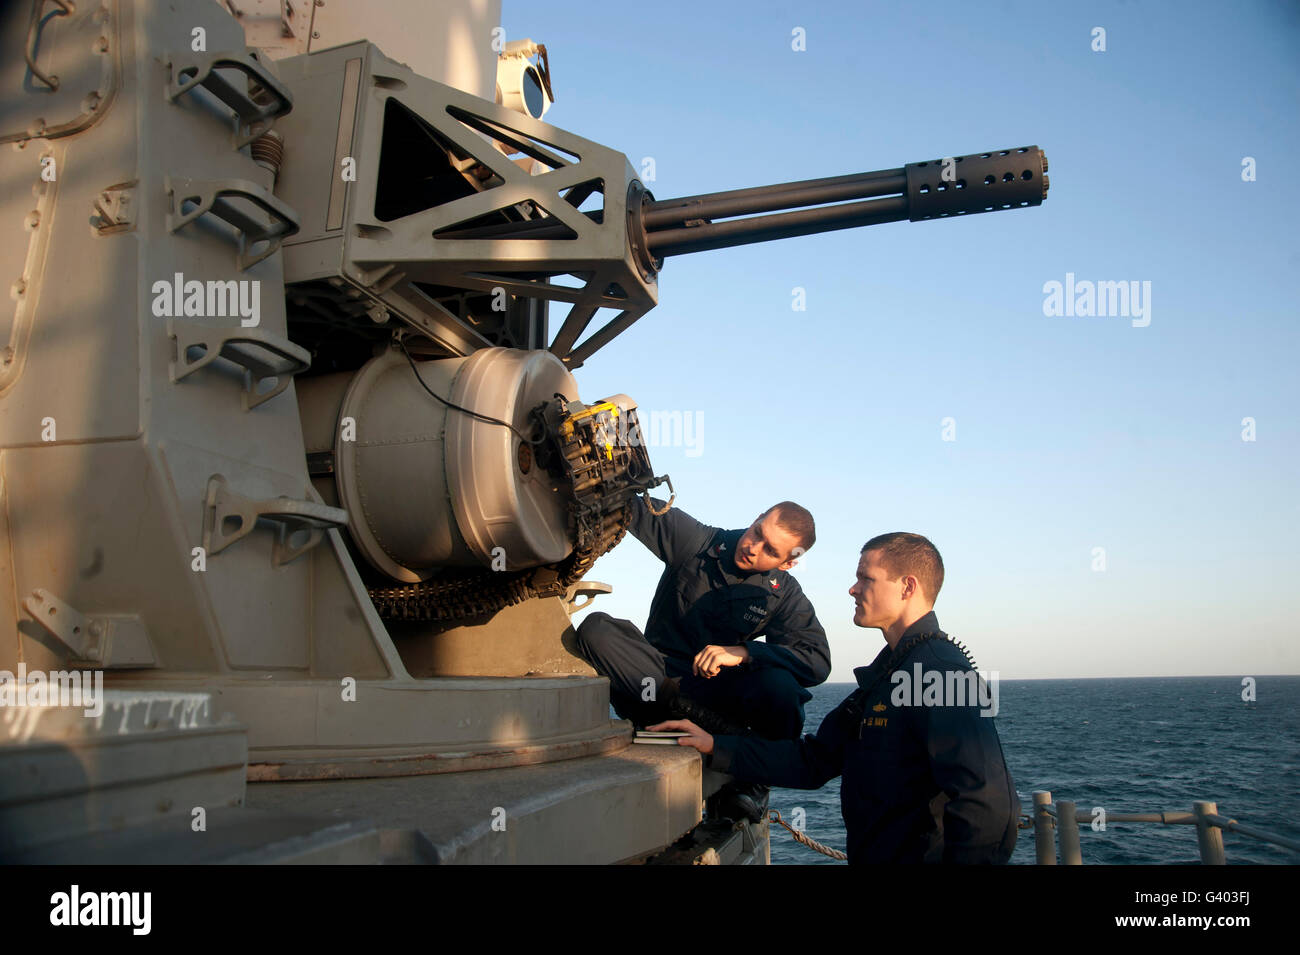 Operations Specialist and Ensign inspect a close-in weapons system. Stock Photo